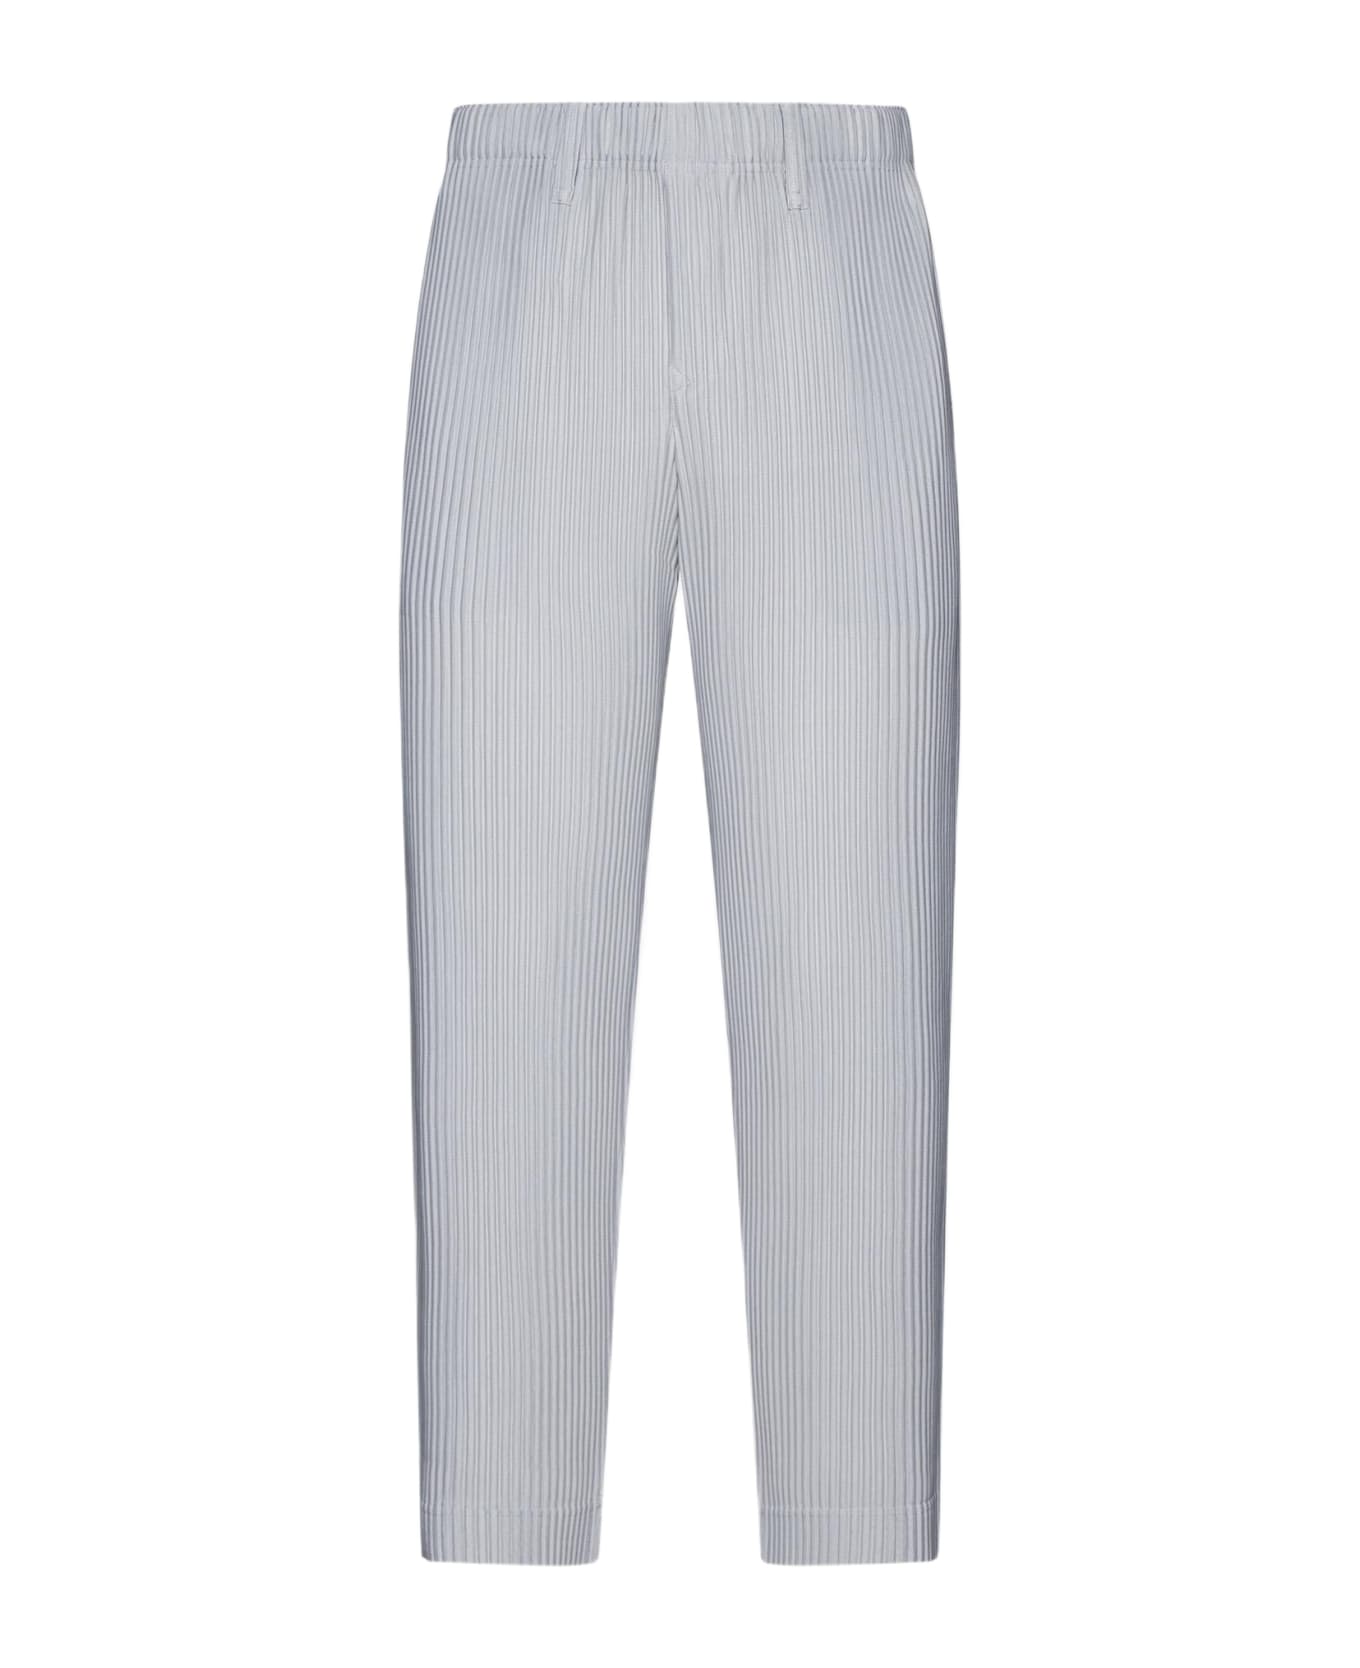 Homme Plissé Issey Miyake Pleated Fabric Trousers - Light Grey